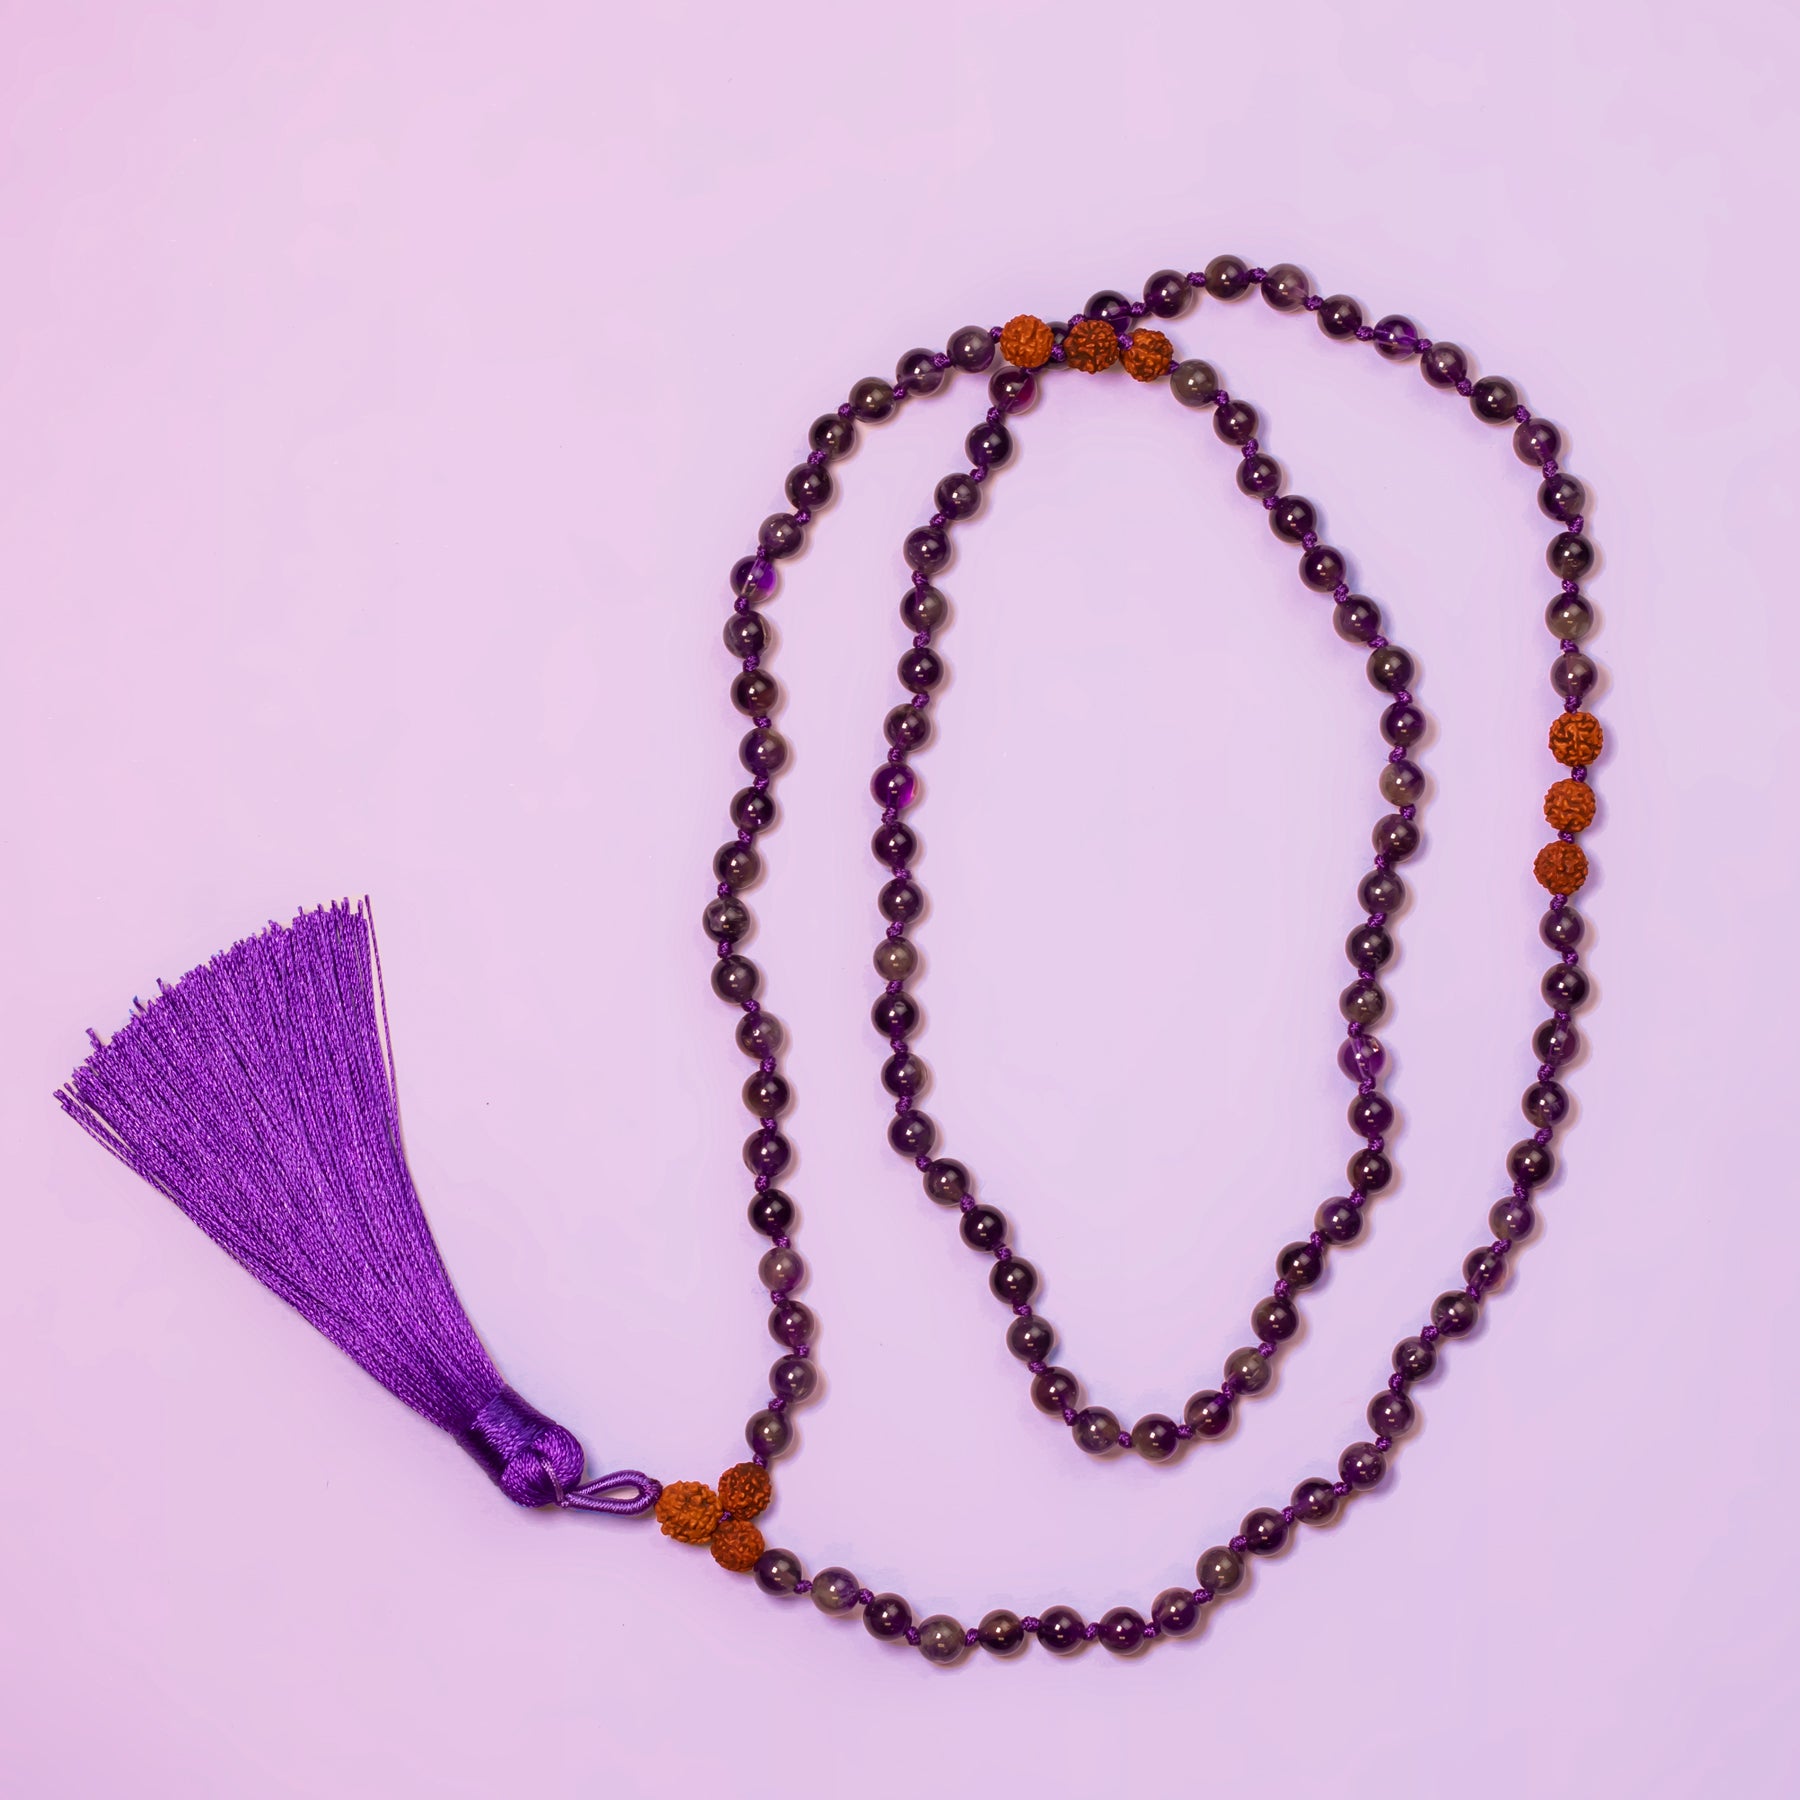 Natural amethyst mala necklace with silk tassel